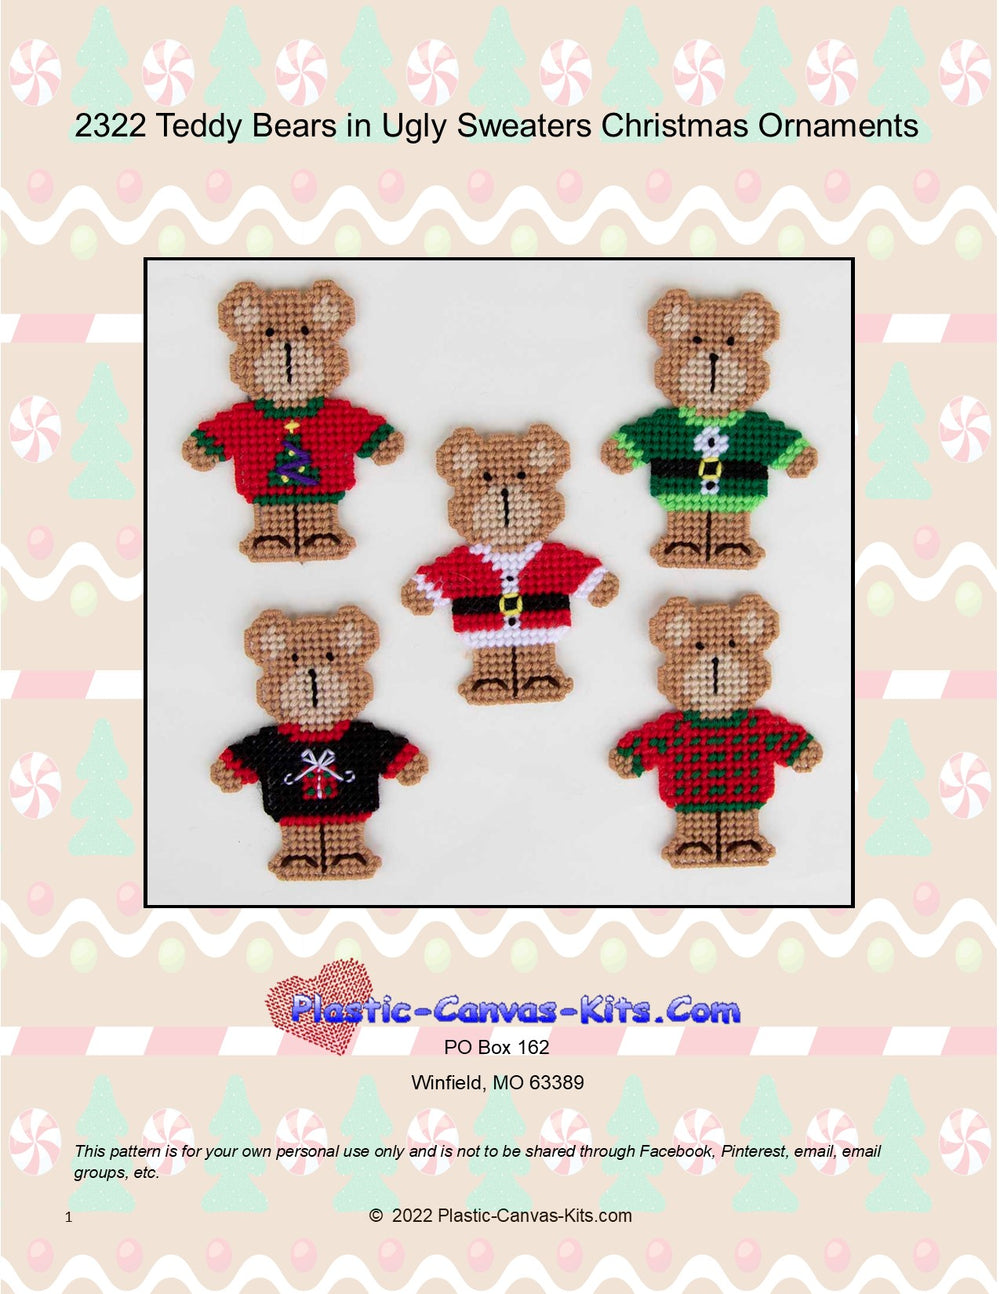 Teddy Bears in Ugly Sweaters Christmas Ornaments